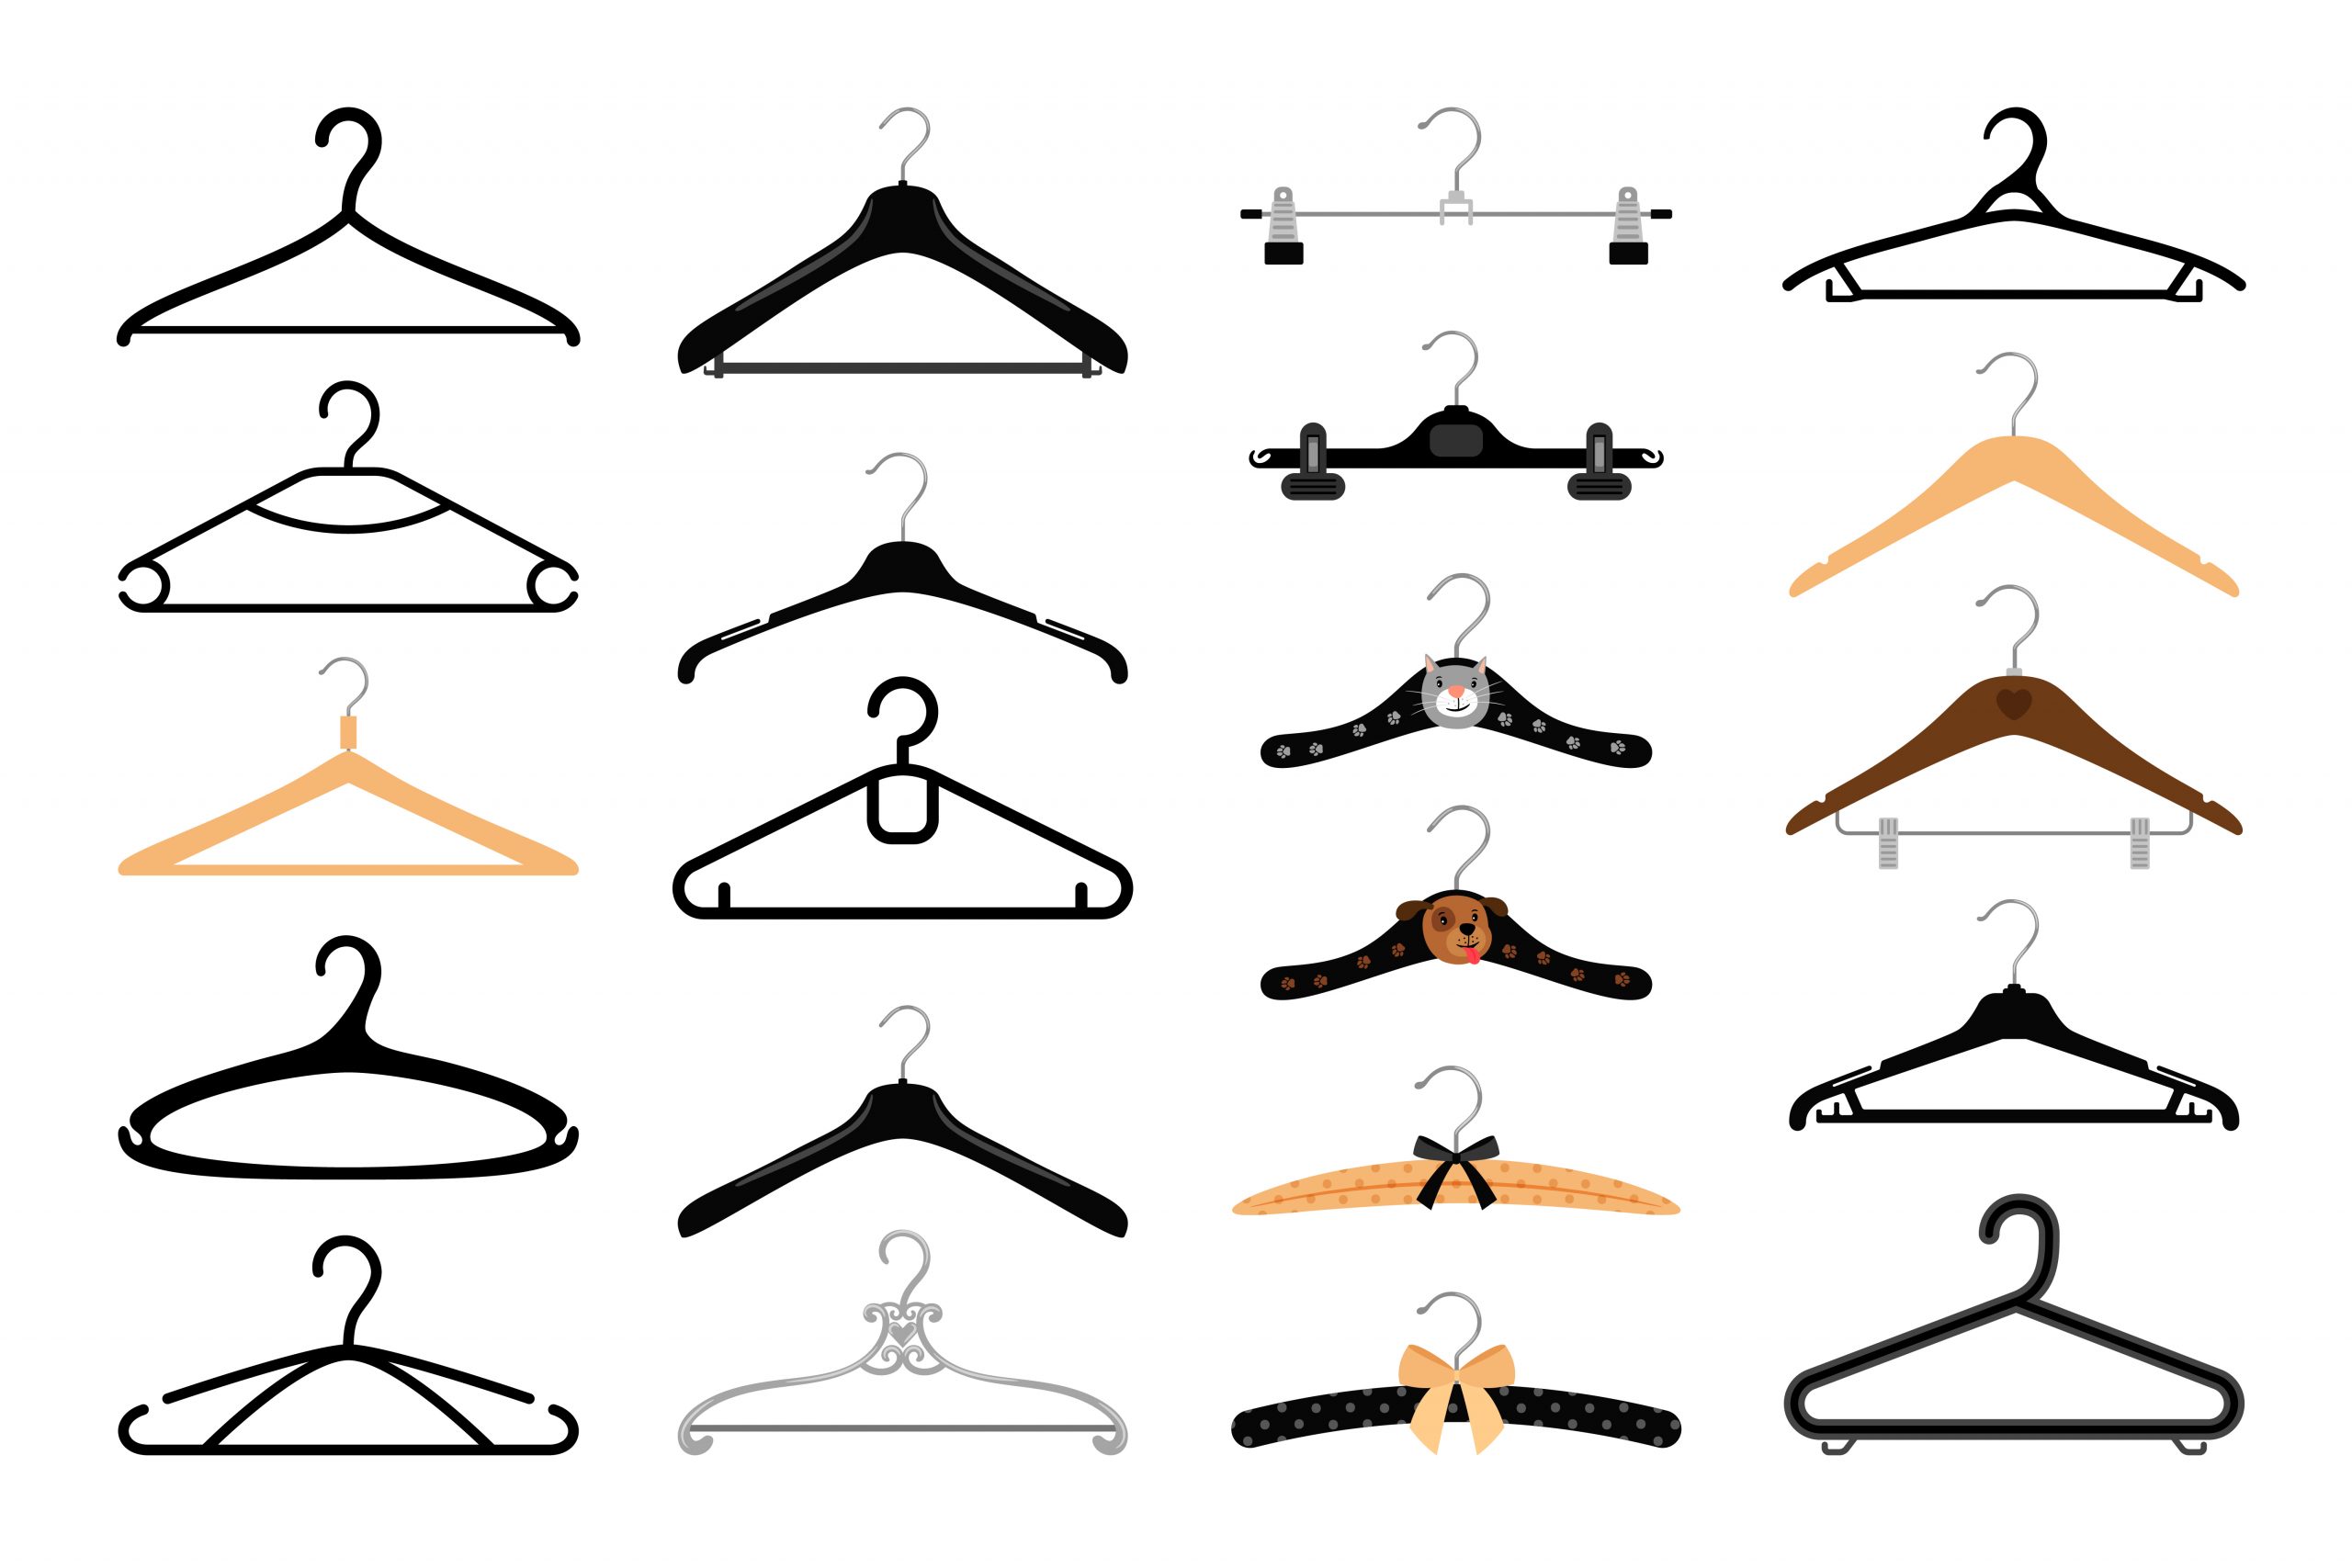 Do you know the different classification of plastic hangers?